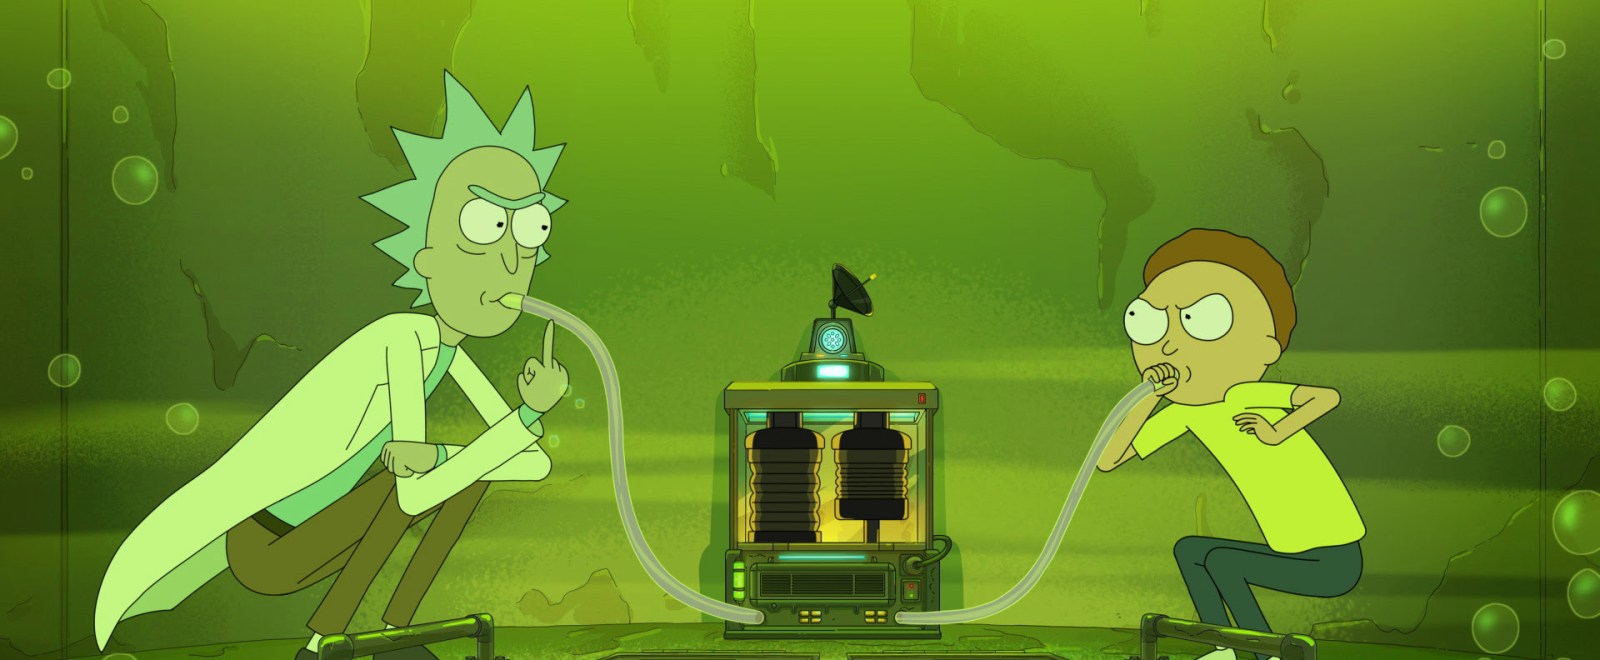 Rick And Morty S Season 5 Guest Stars Include A Community Favorite And Timothy Olyphant - costo in gemme rosa brawl stars